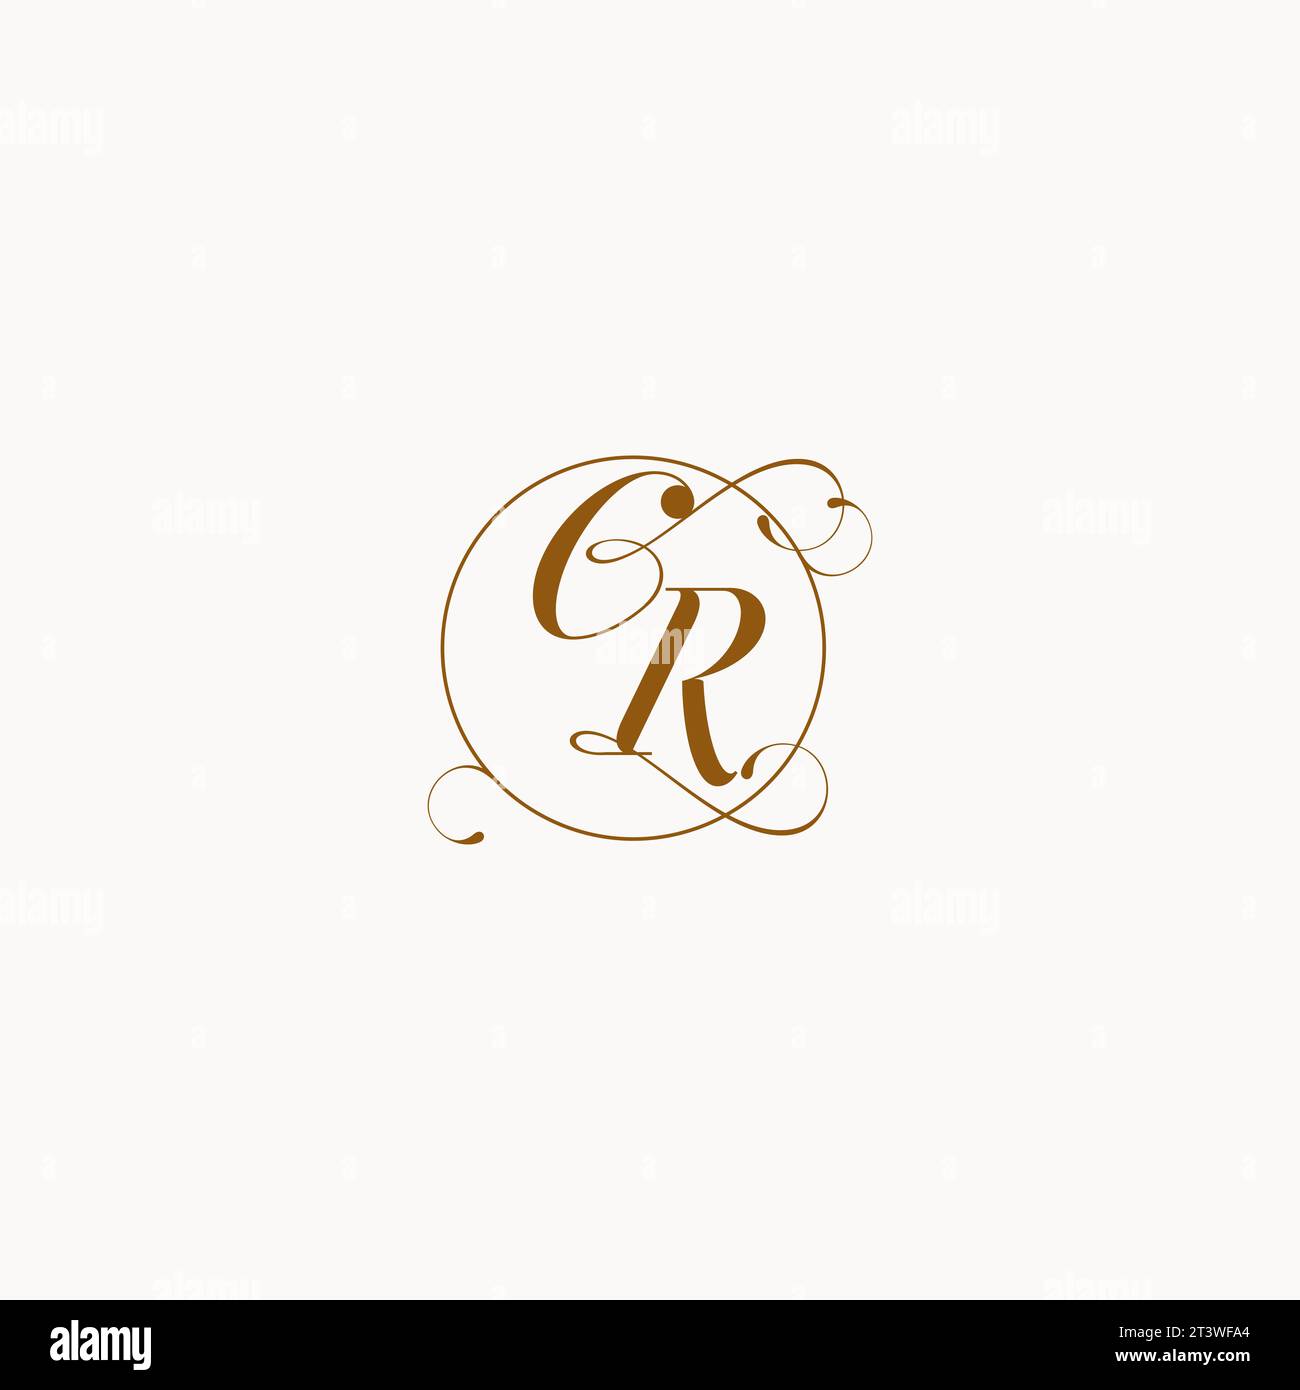 CR uniquely wedding logo symbol of your marriage and you can use it on your wedding stationary Stock Vector